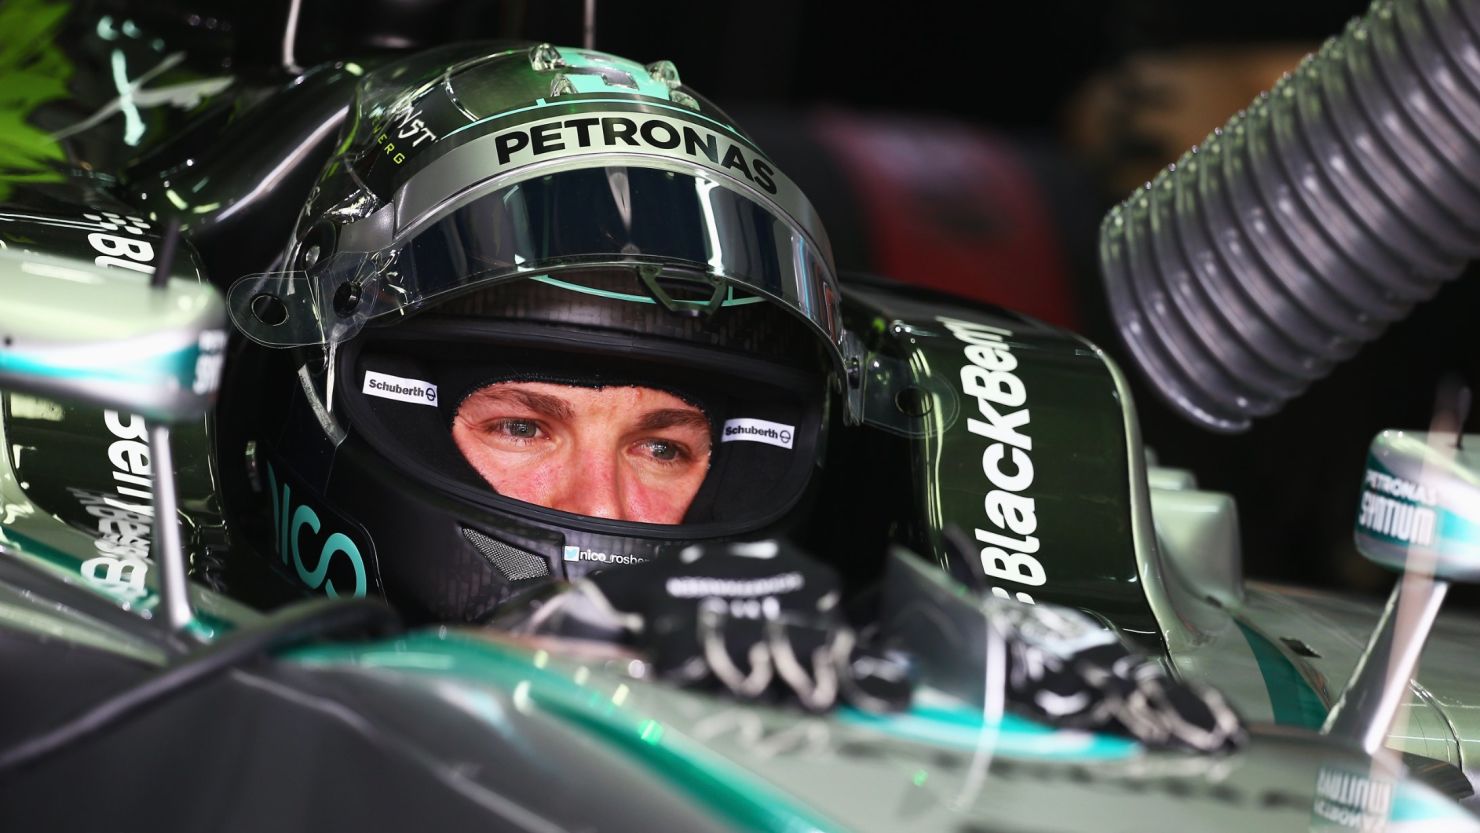 Nico Rosberg of Germany and Mercedes GP prepares to drive during practice for the Malaysia Formula One Grand Prix at the Sepang Circuit.